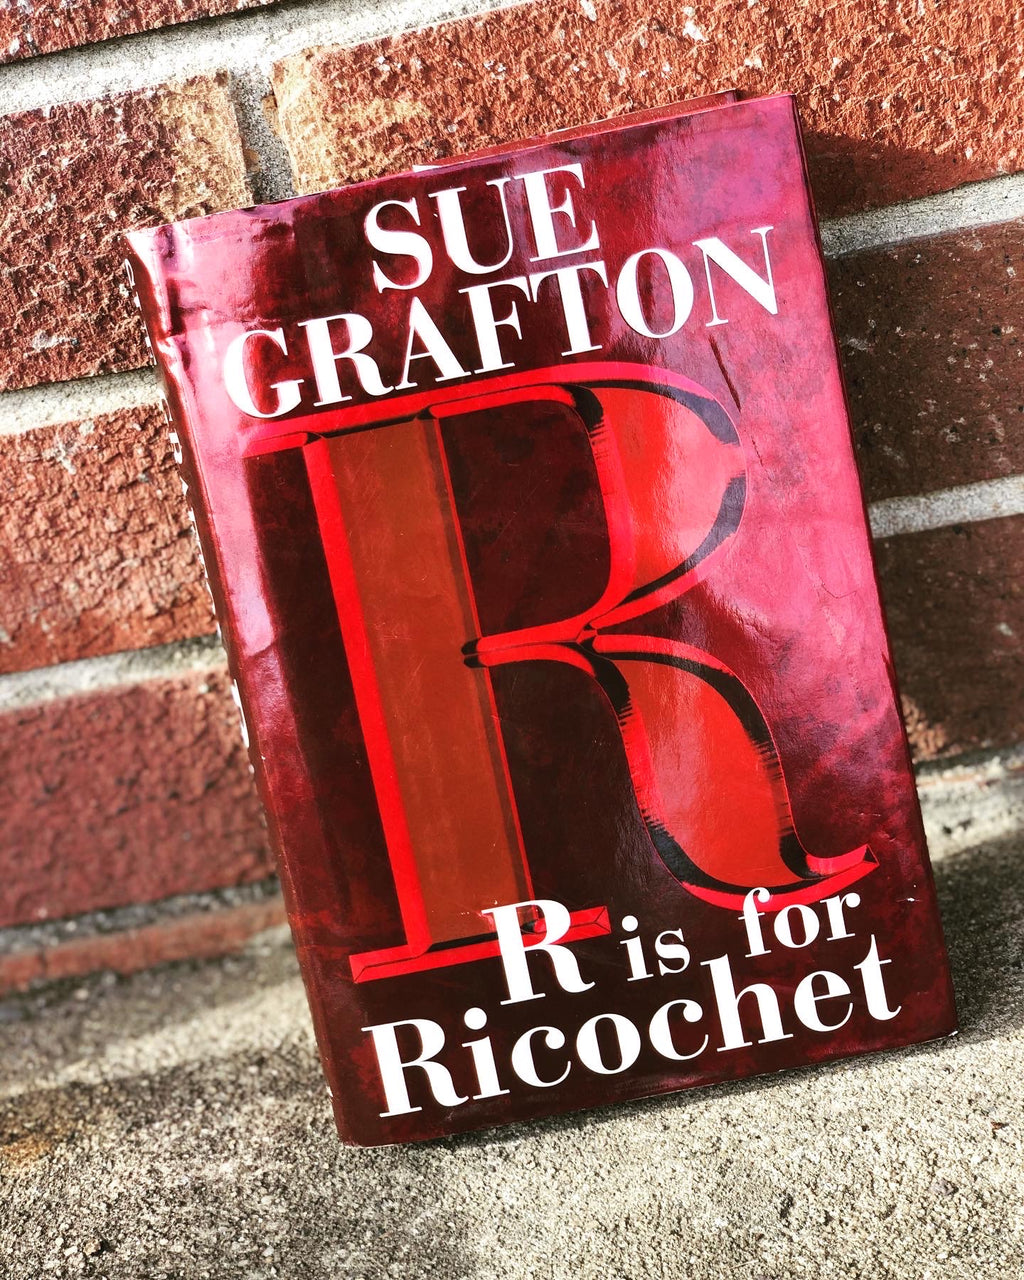 R is for Ricochet- By Sue Grafton